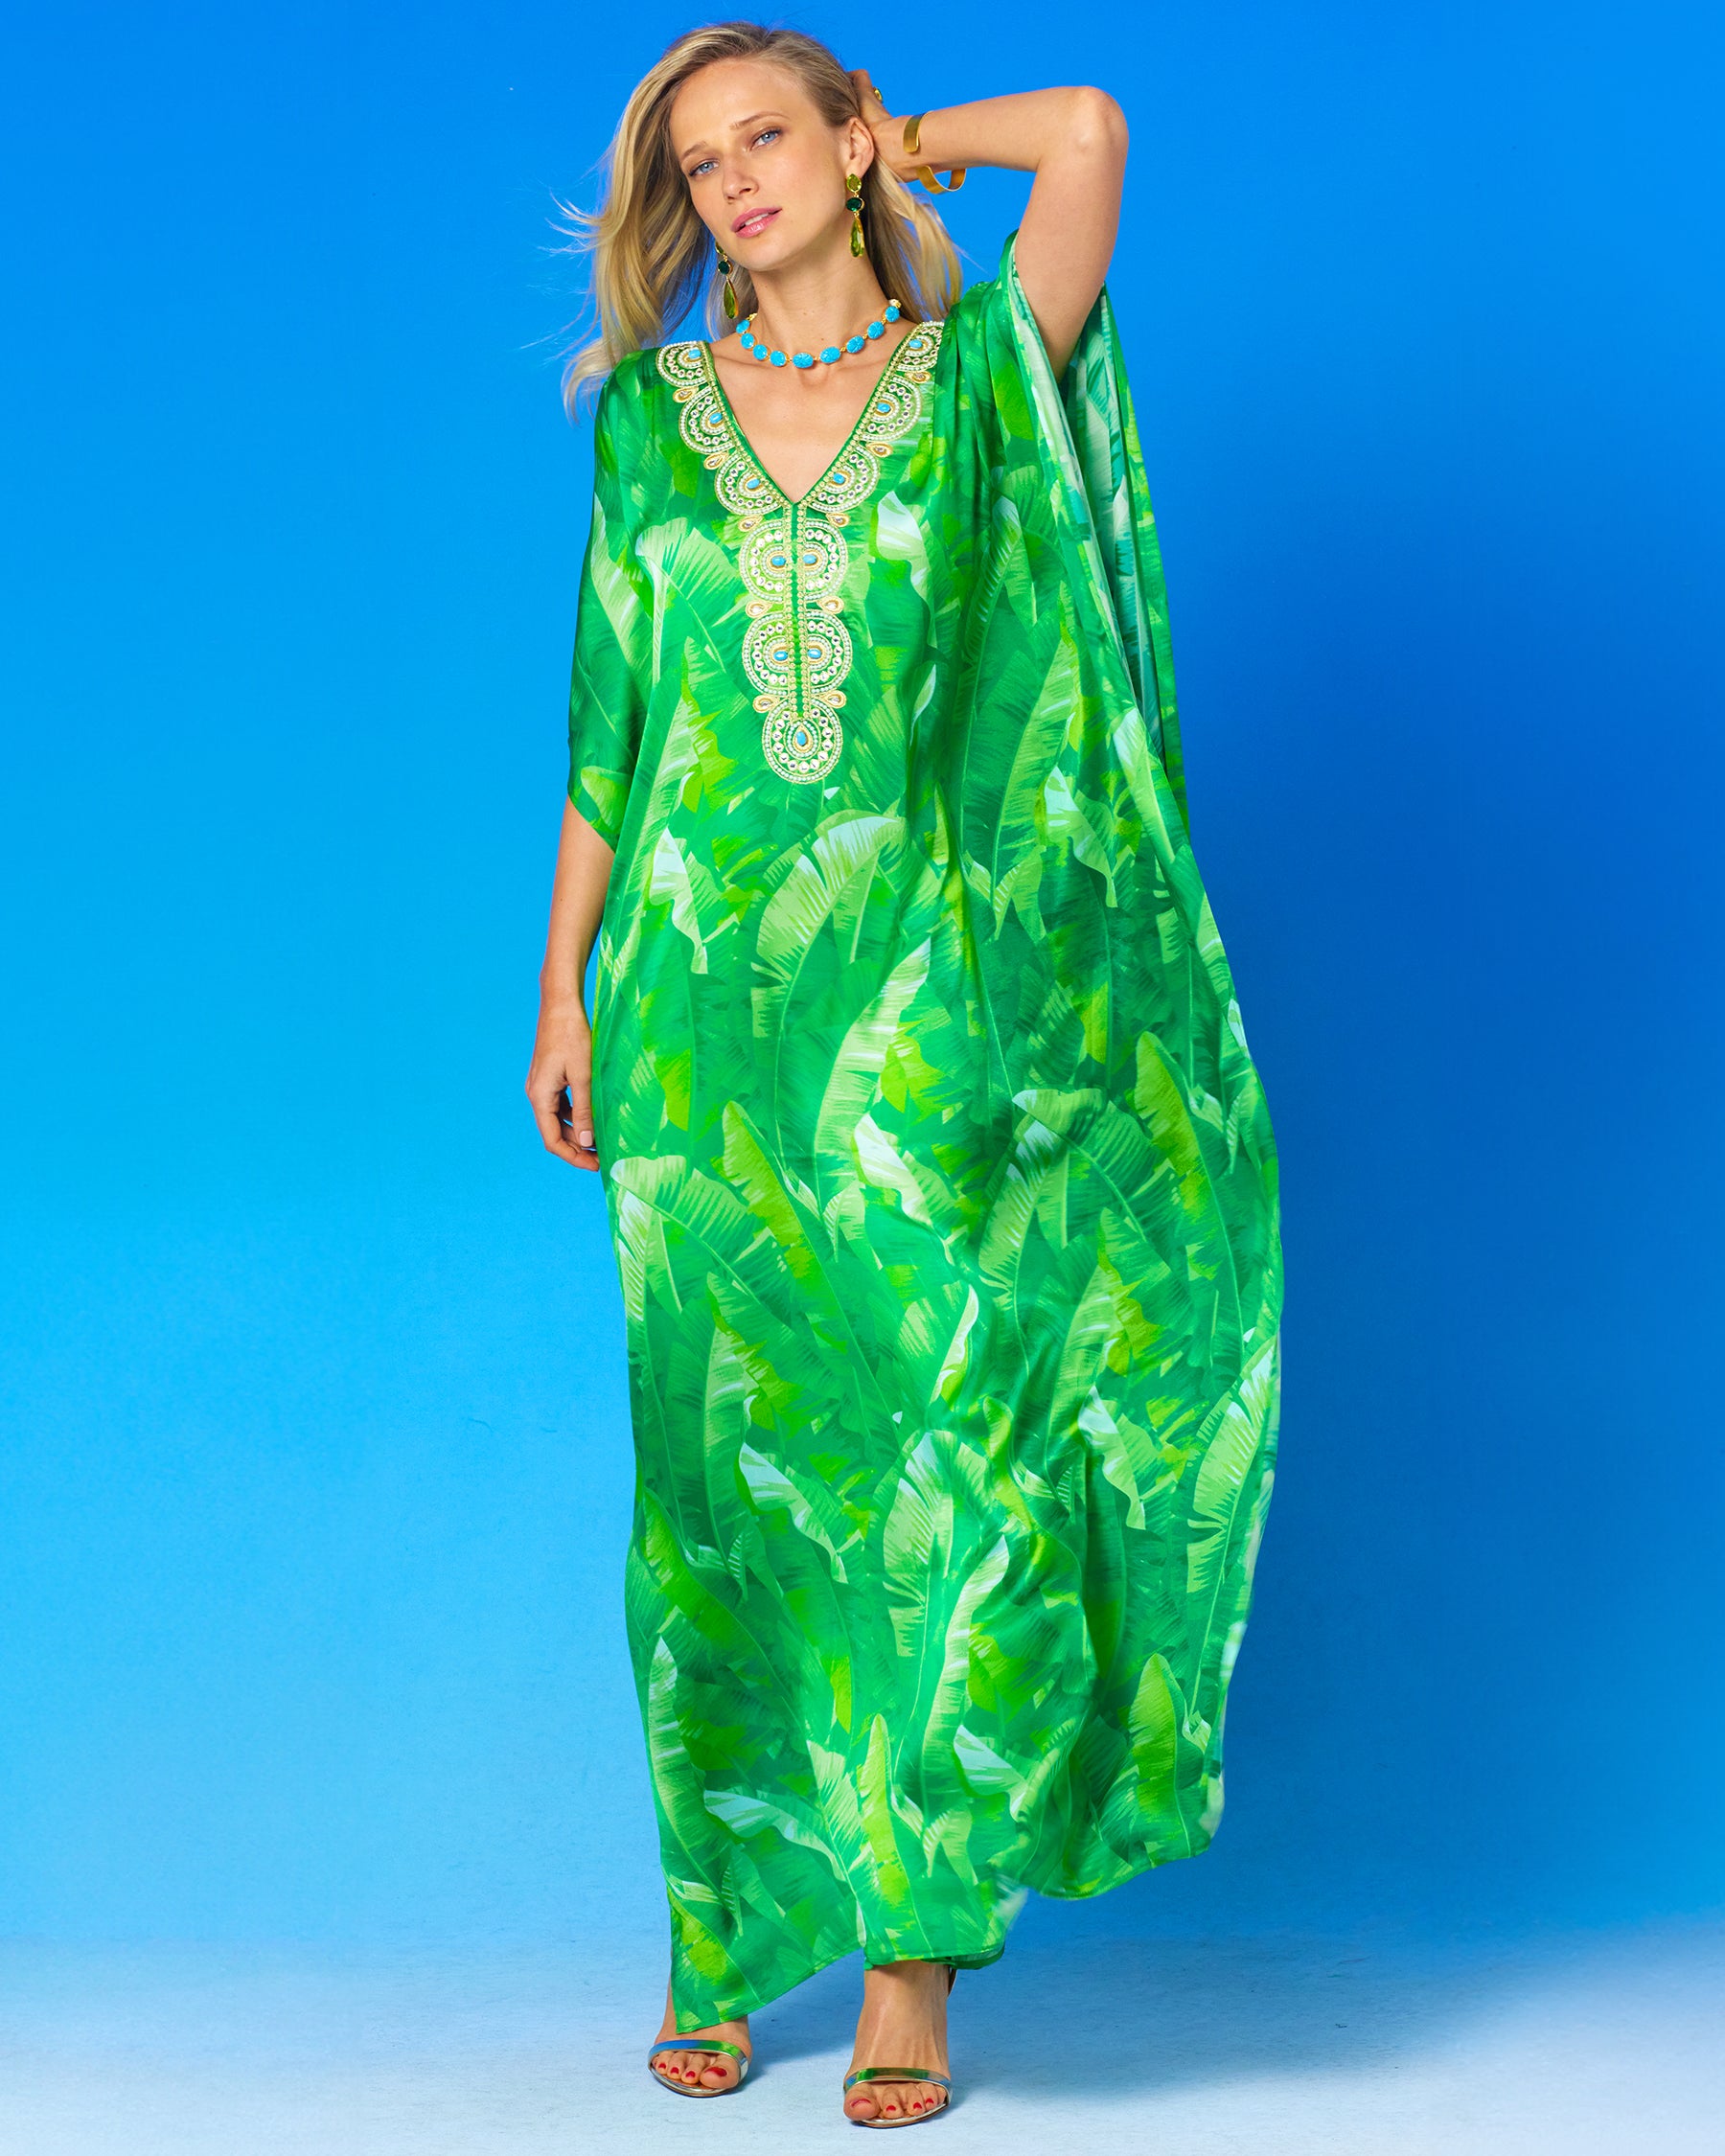 Schuyler Silk Kaftan in Palms and Gold Embellishment-Front full view with arm on head